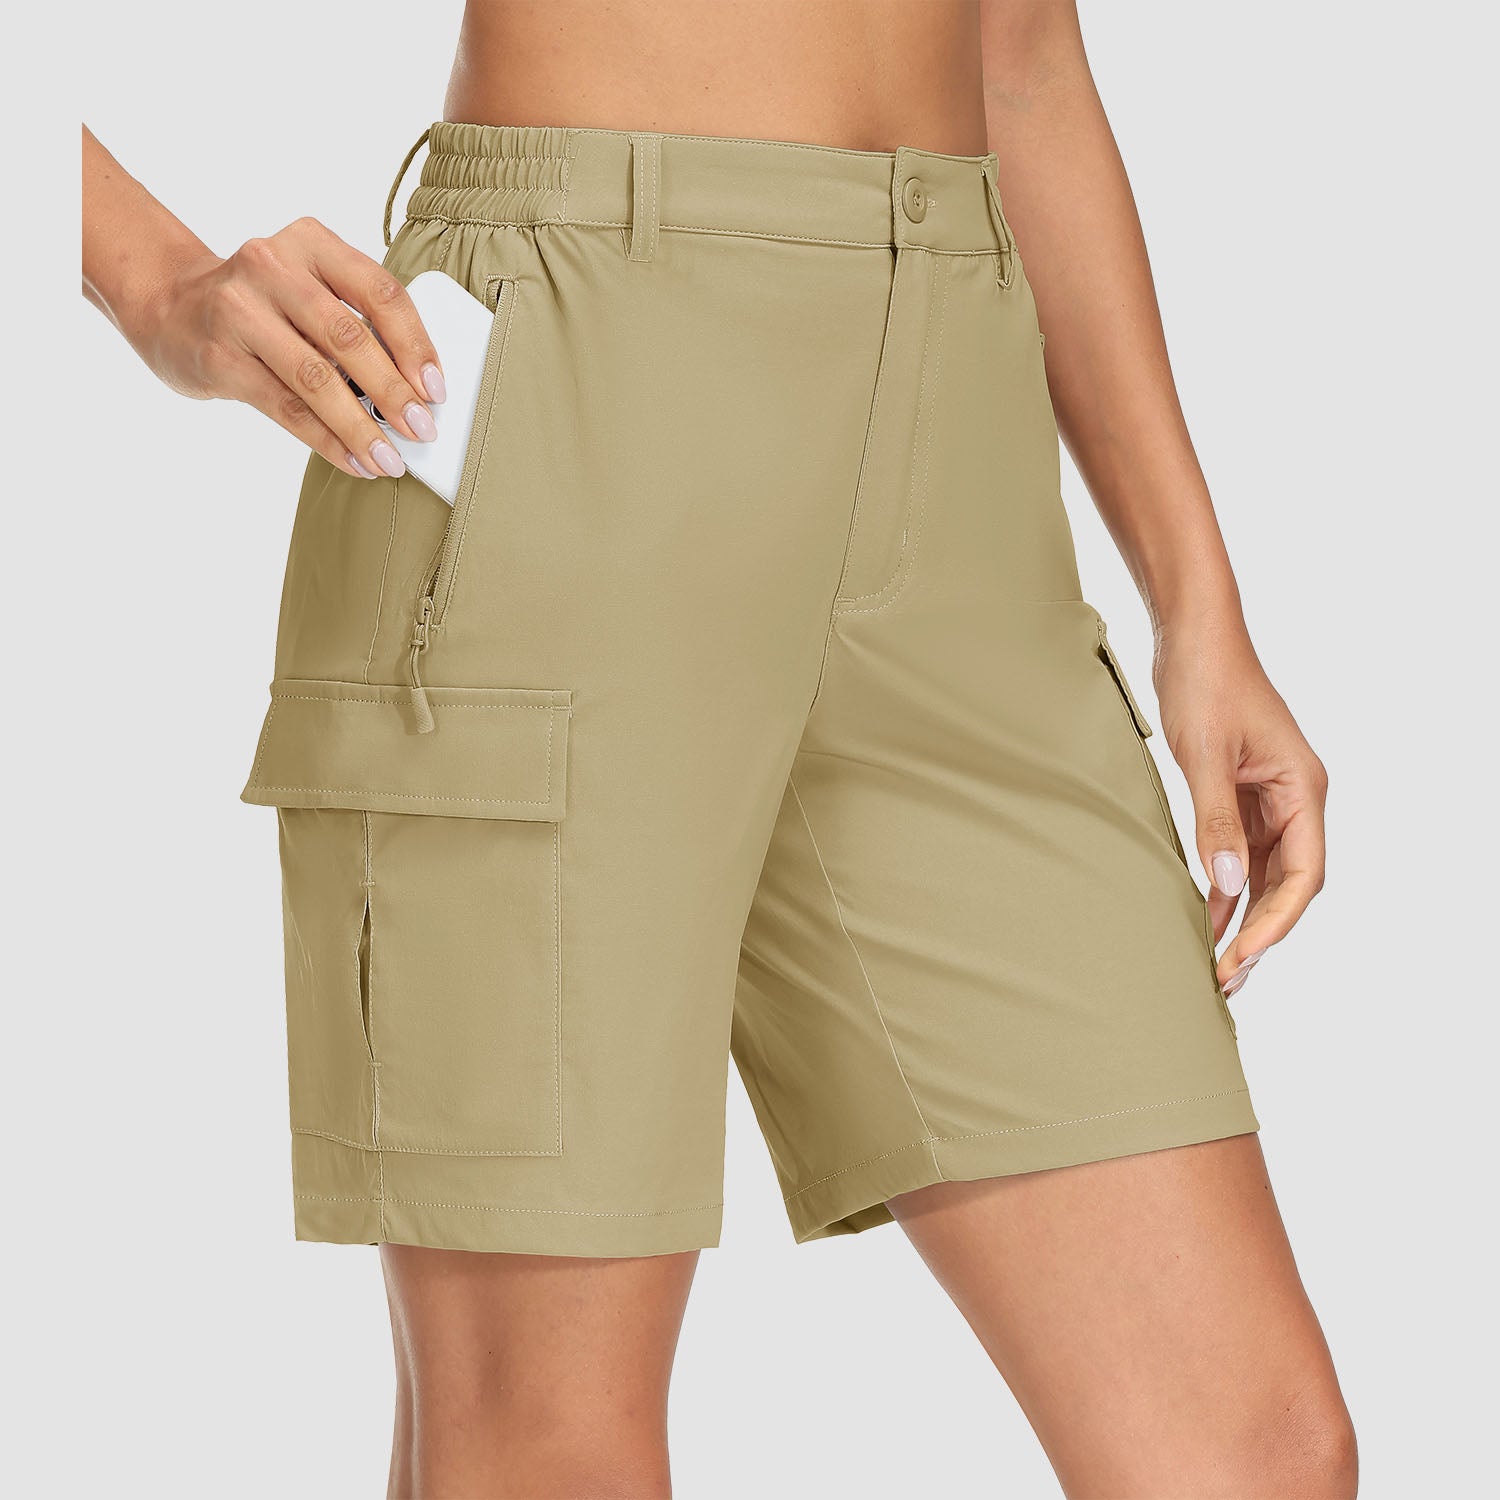 Women's Hiking Shorts Cargo Shorts Quick Dry with 5 Pockets Water-Resistant Ripstop